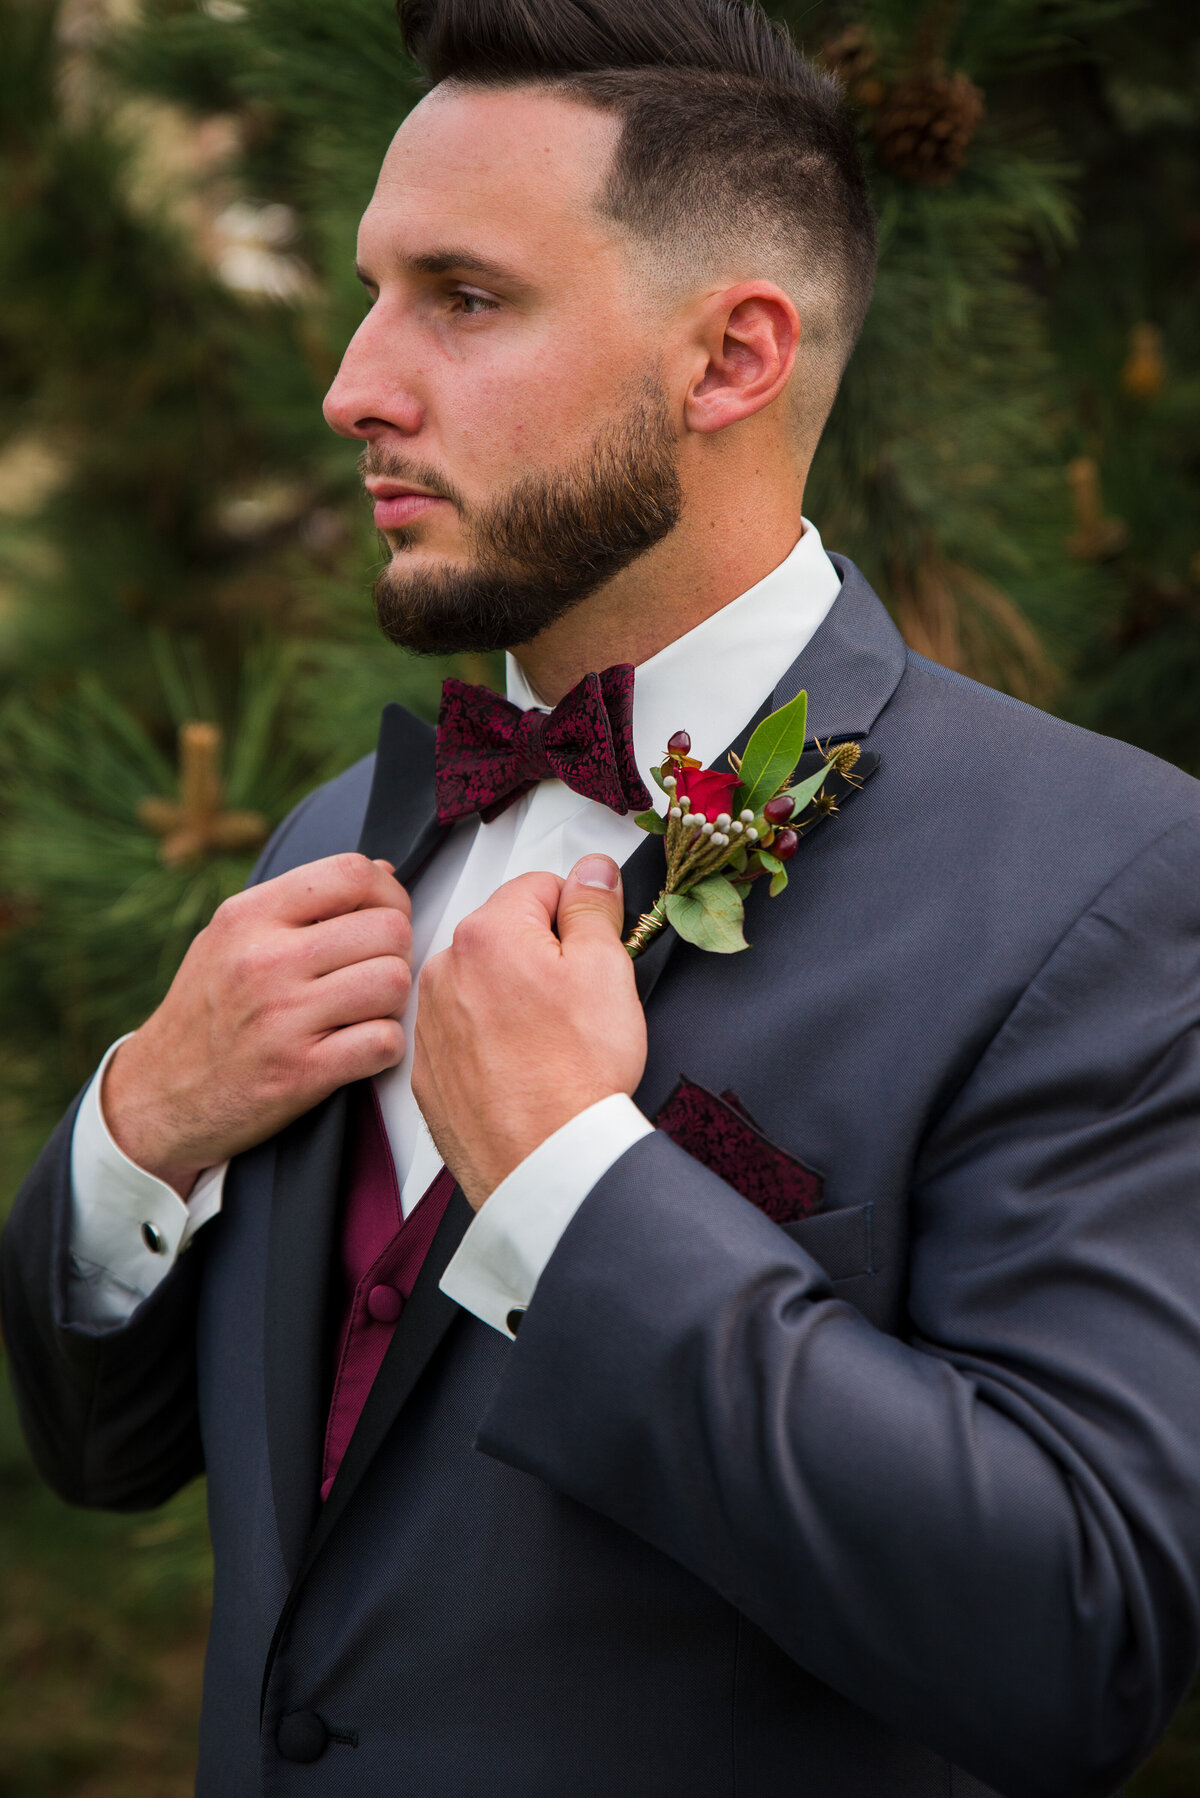 A groom looks into the distance as he adjusts his suit jacket.